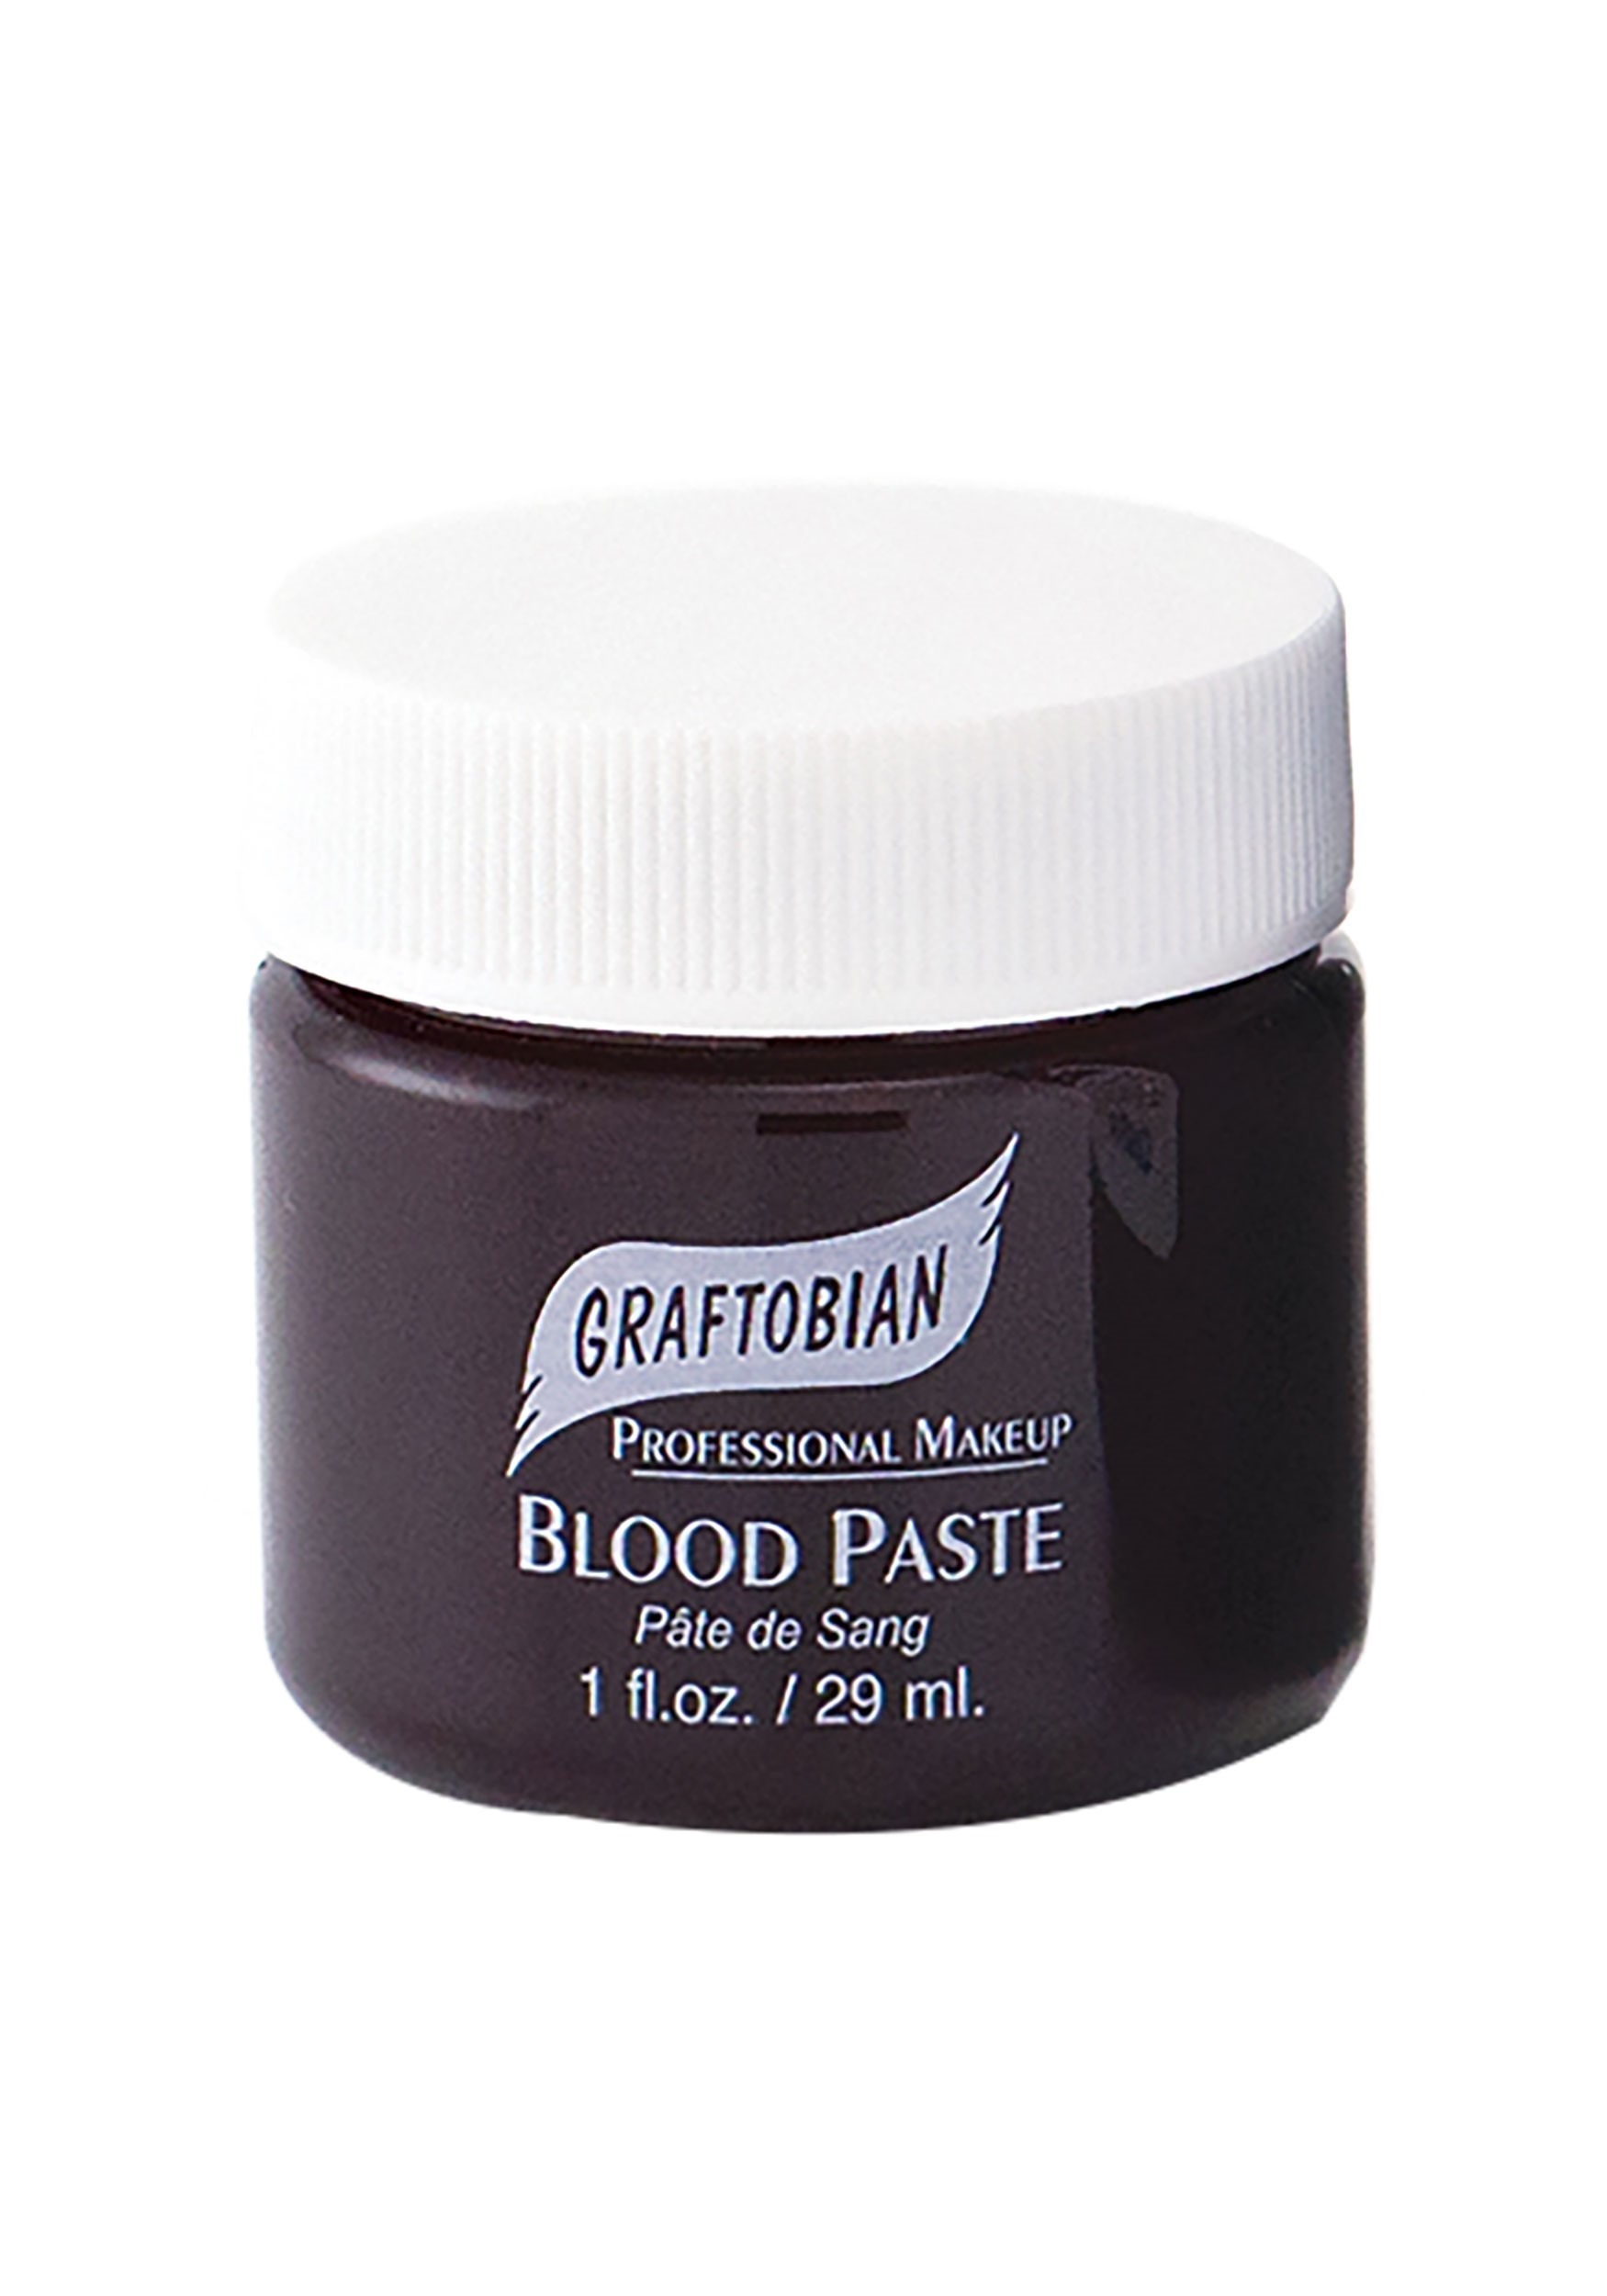 One ounce Blood Paste